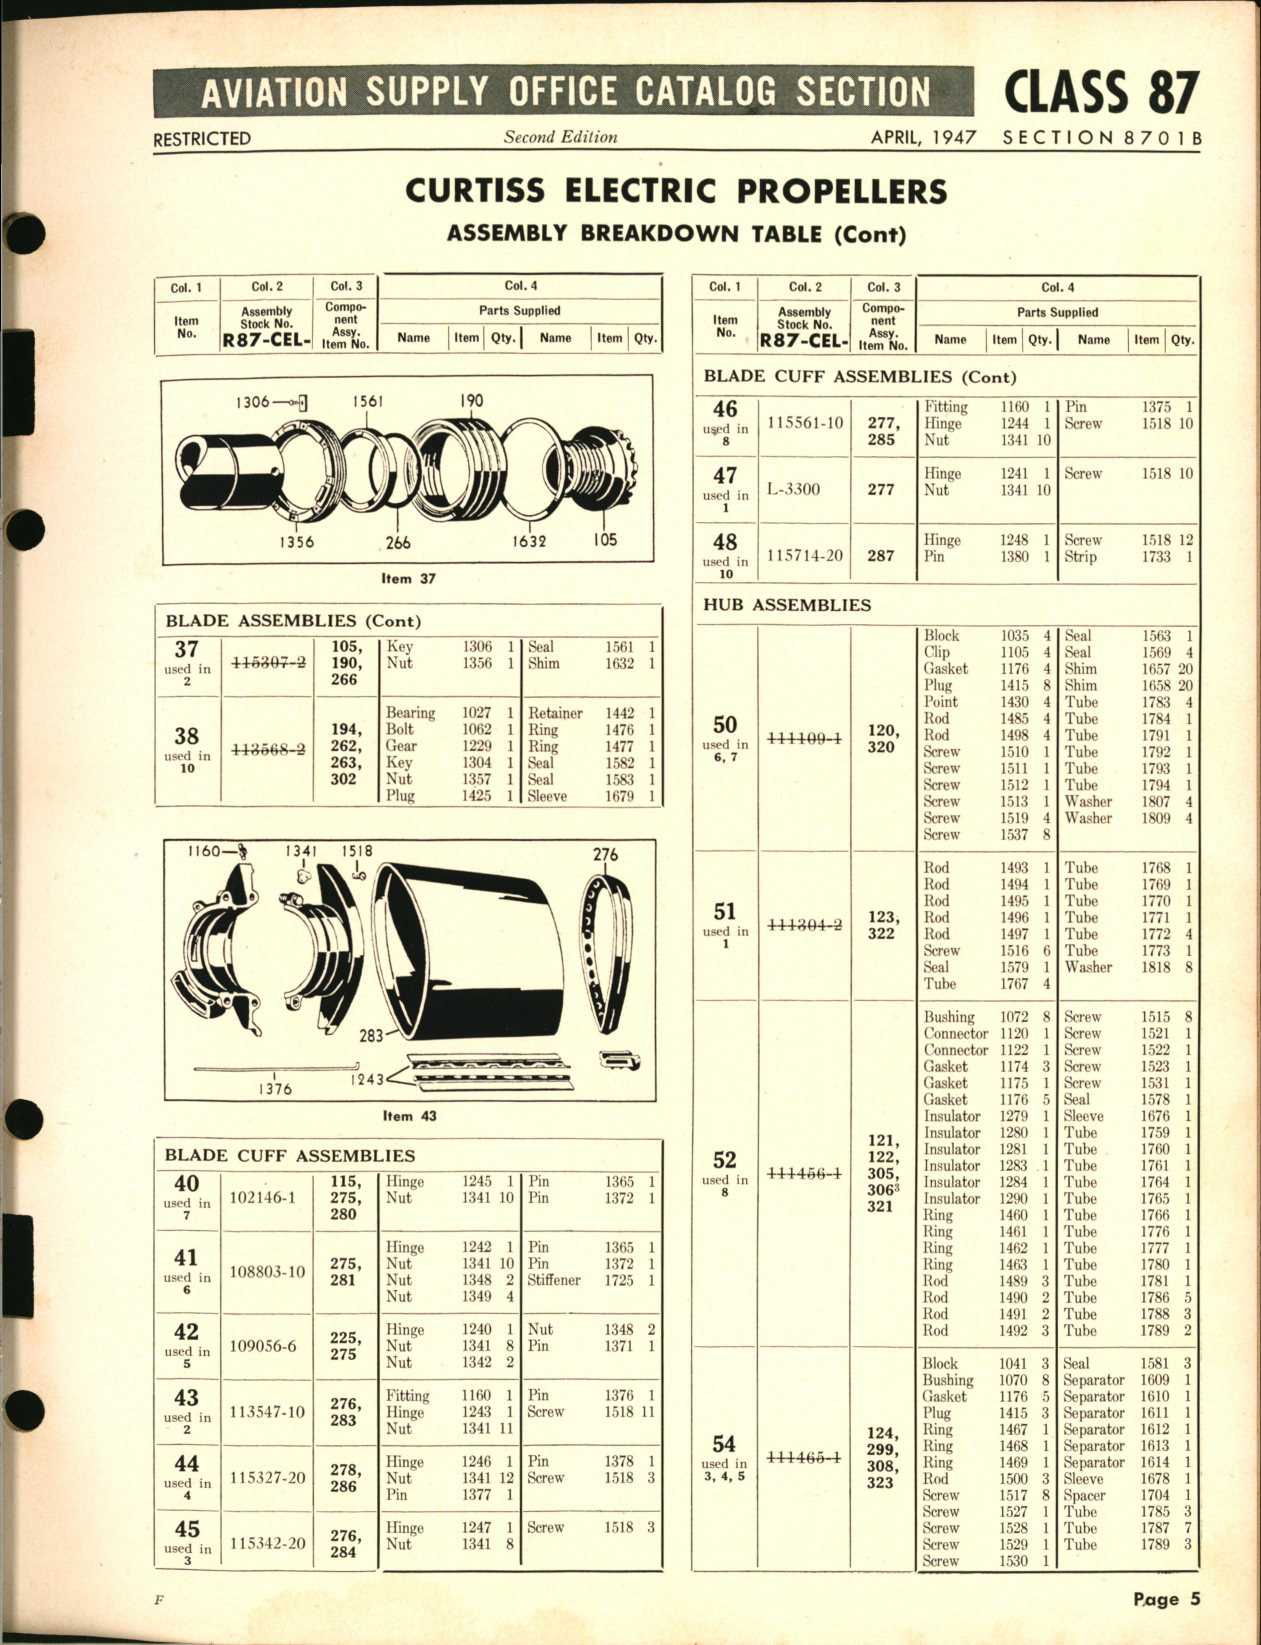 Sample page 5 from AirCorps Library document: Curtiss Electric Propellers